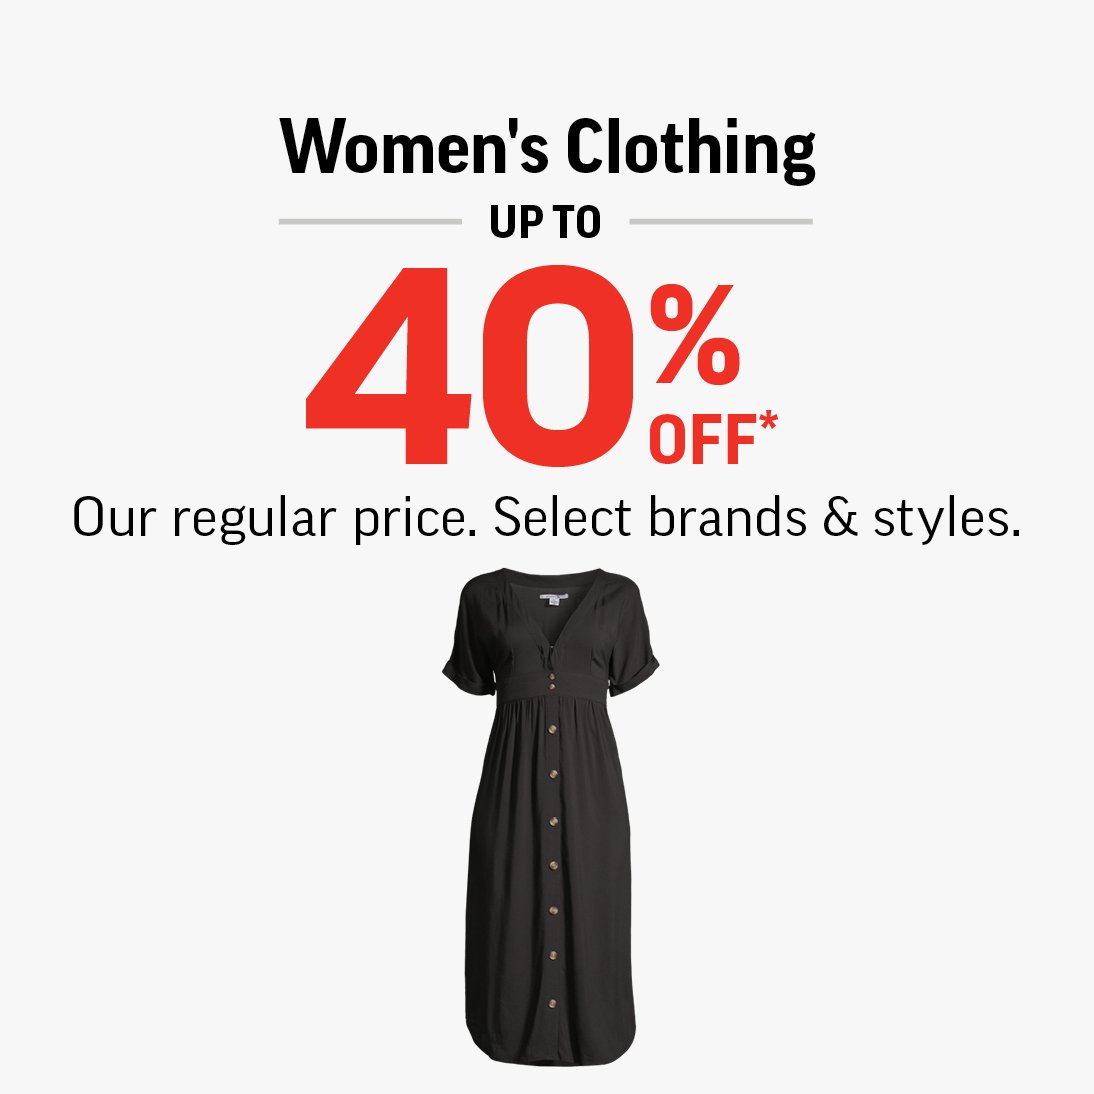 WOMEN'S CLOTHING UP TO 40% OFF